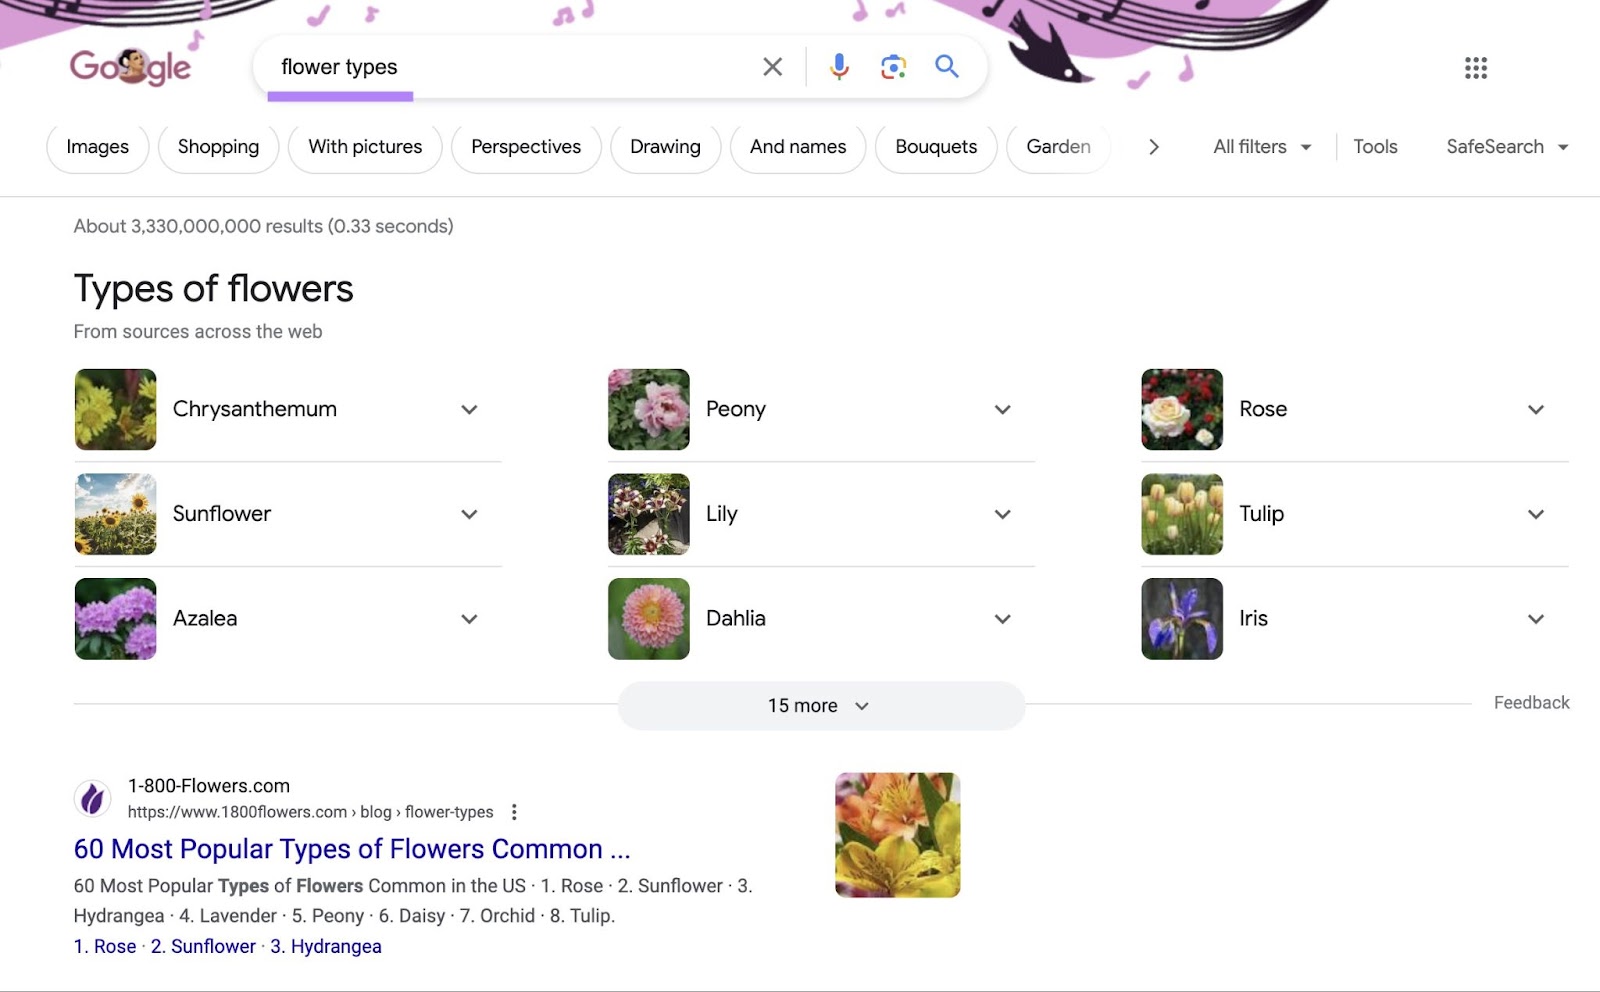 Top of Google's SERP for the "flower types" query